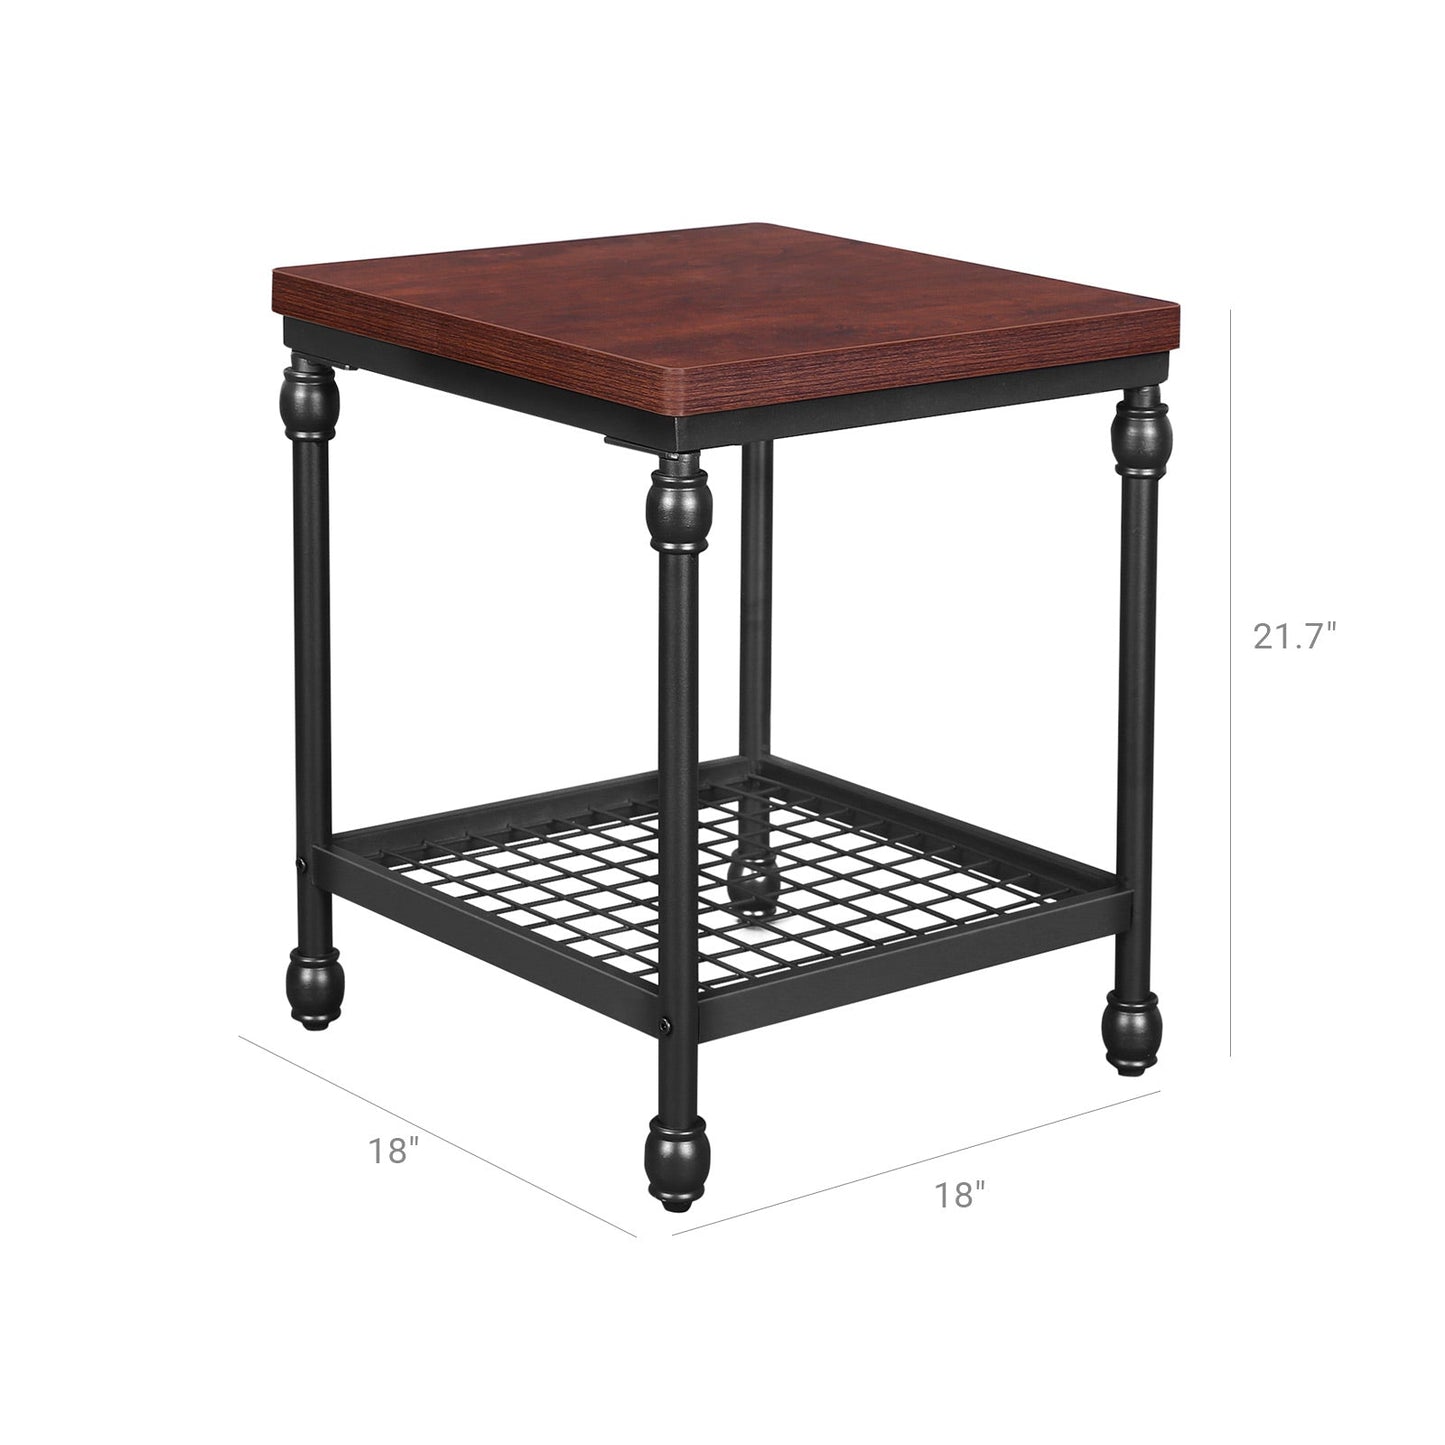 VASAGLE Traditional Style Side Table